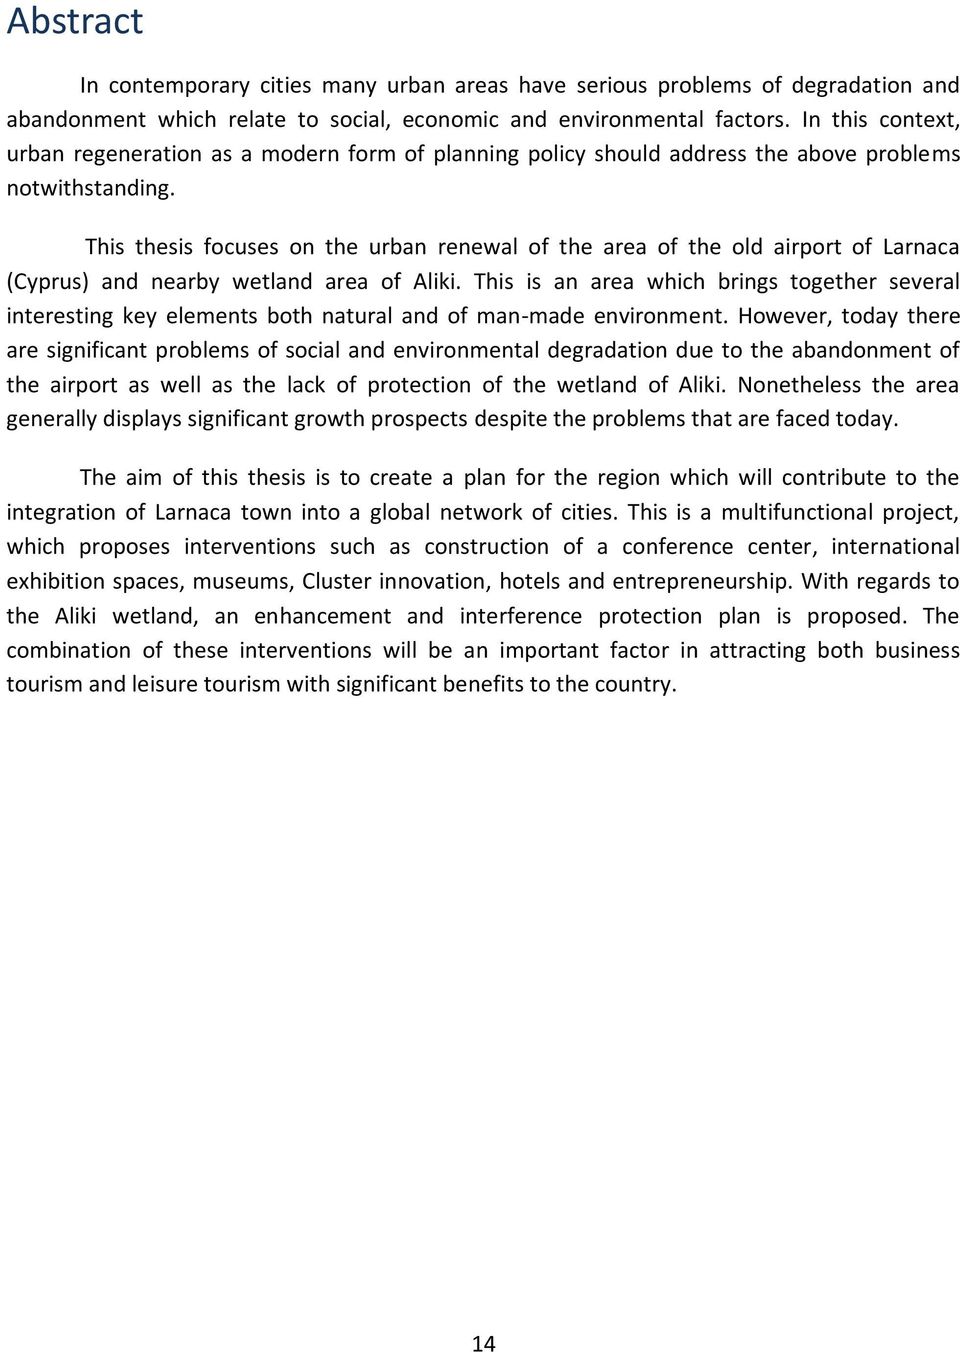 This thesis focuses on the urban renewal of the area of the old airport of Larnaca (Cyprus) and nearby wetland area of Aliki.